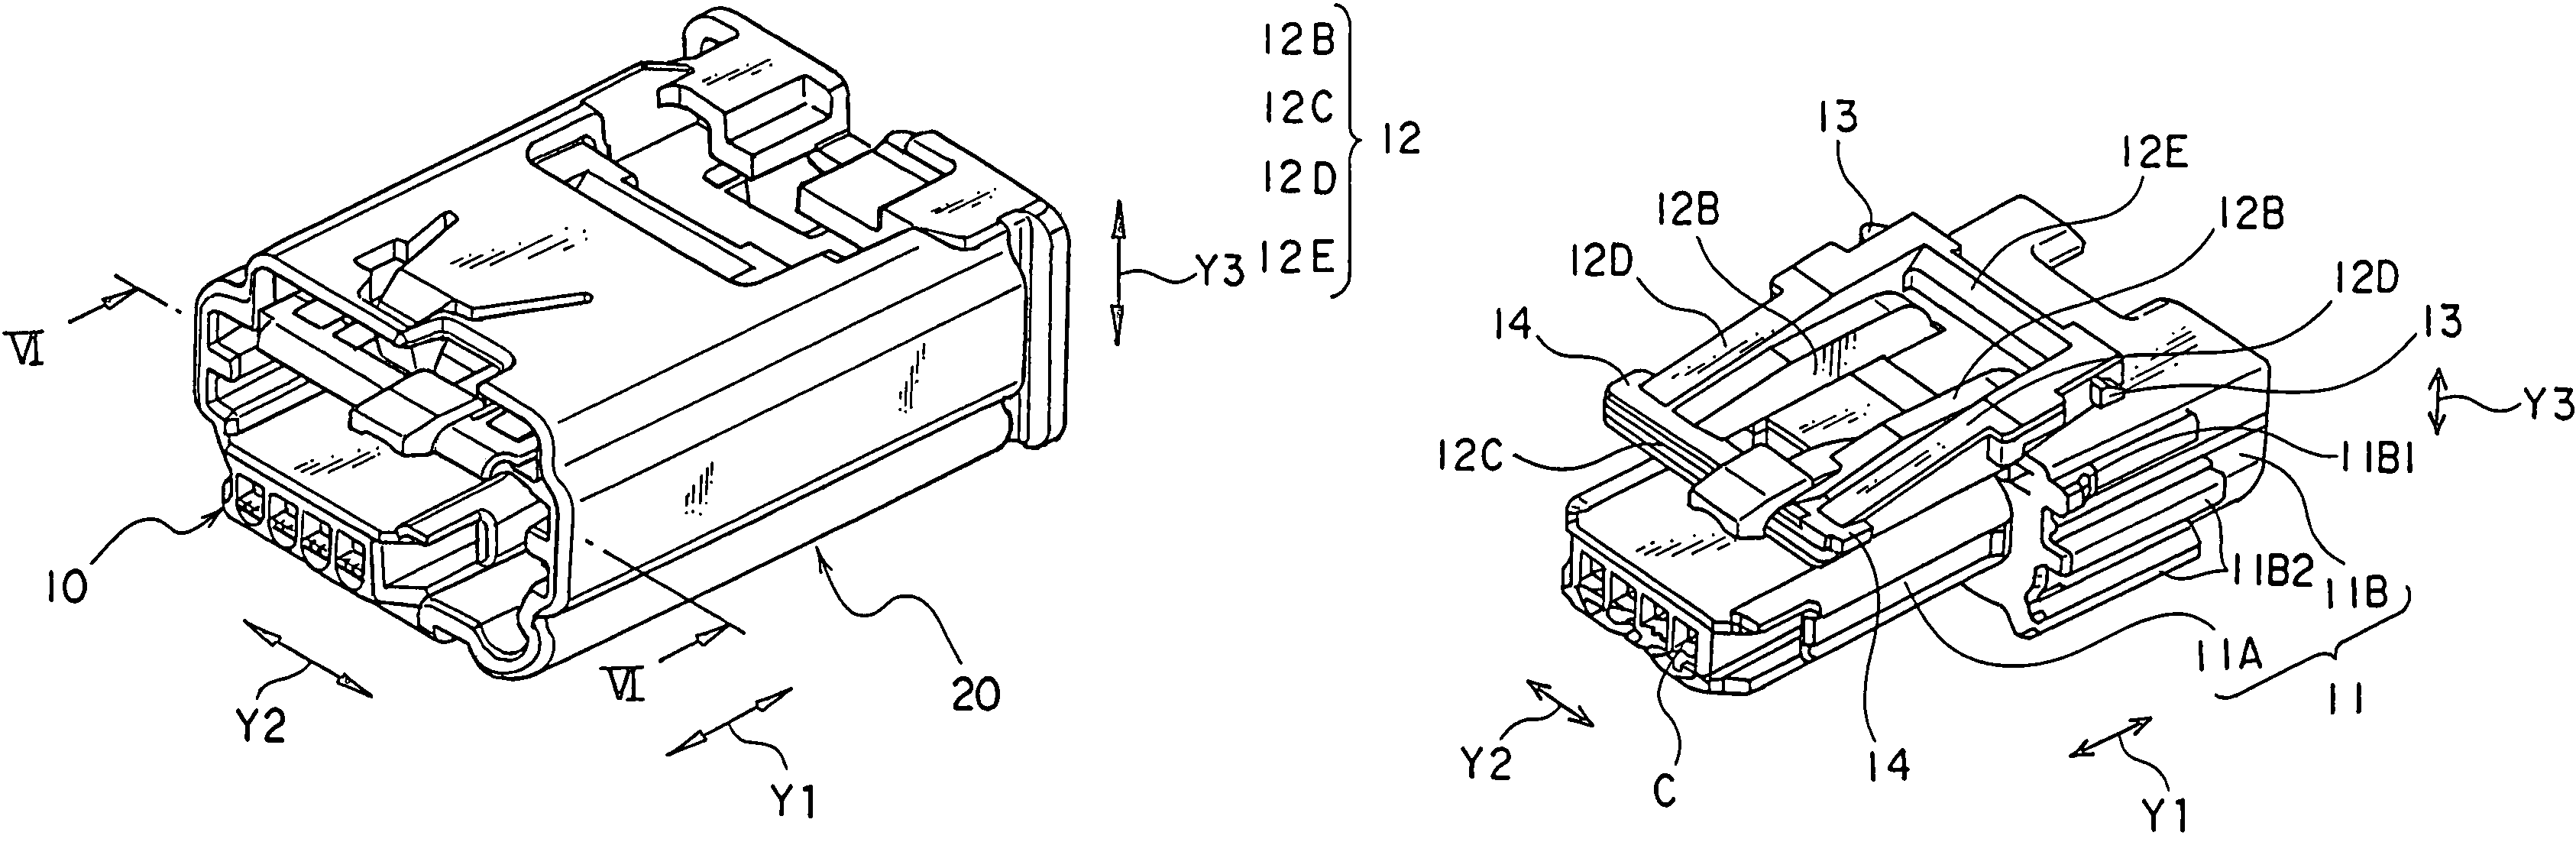 Connector having a female connector housing and a housing cover